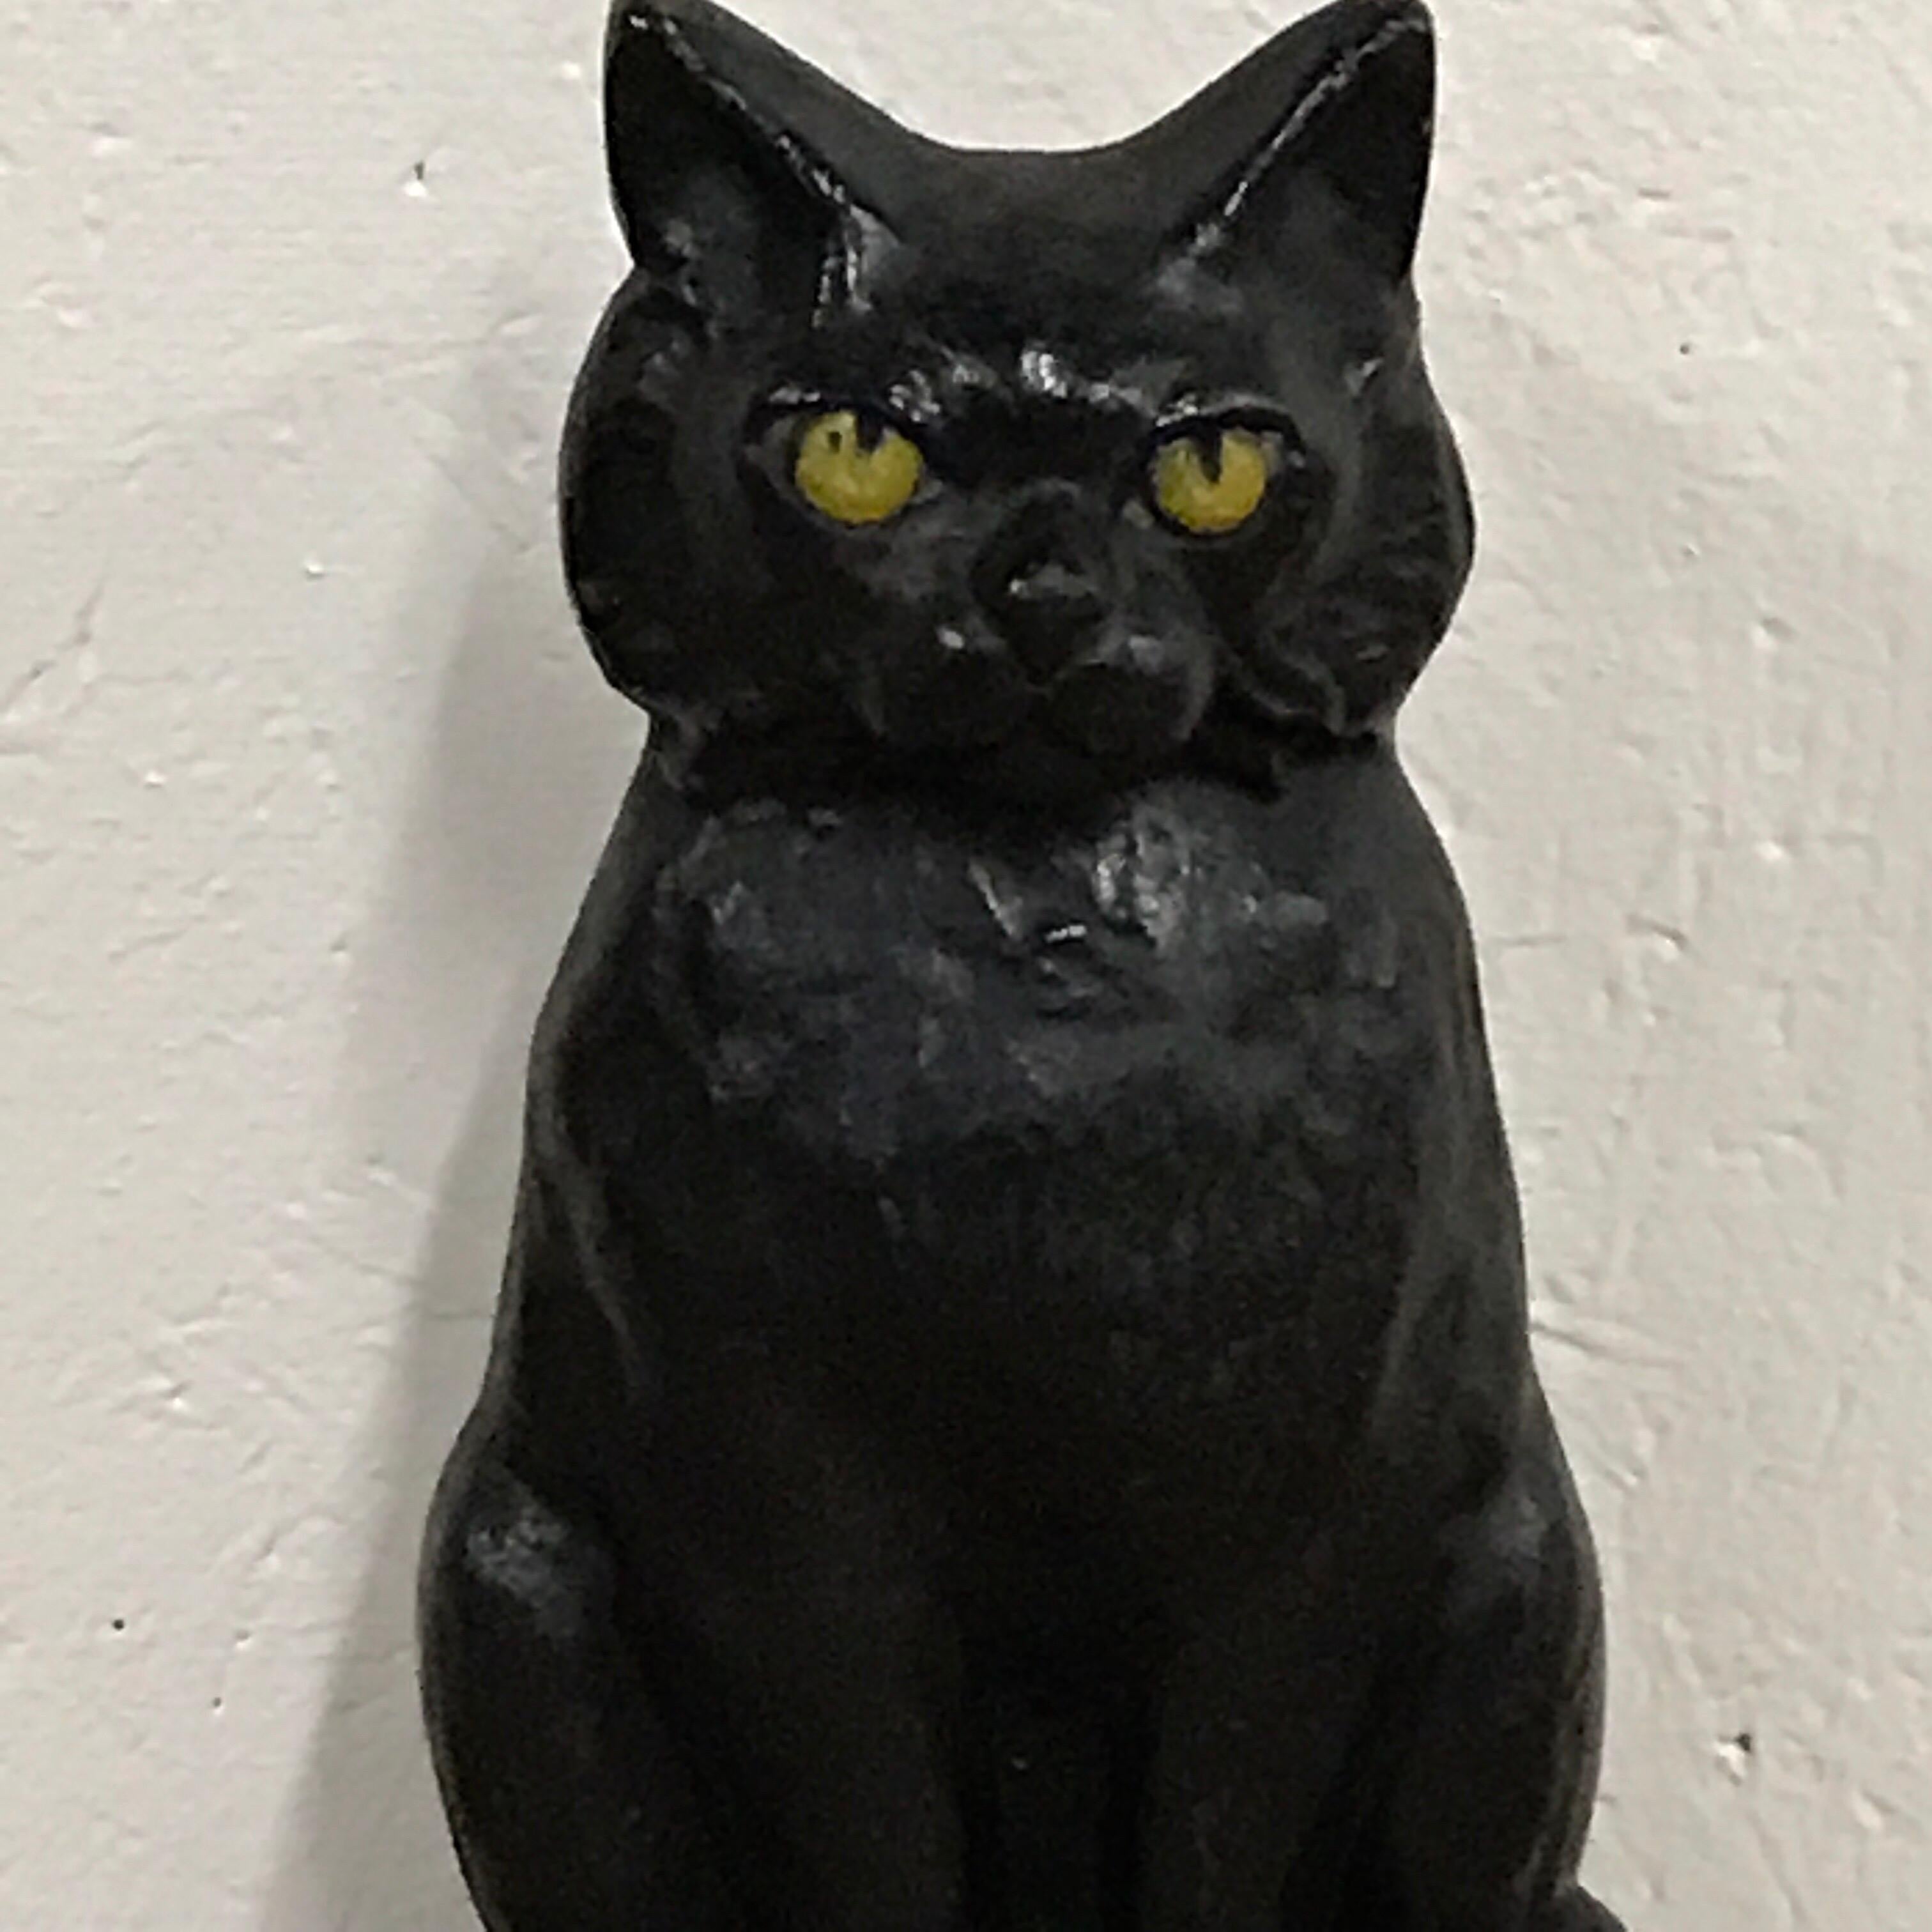 Antique cast iron seated cat doorstop seated on a stoop with an expressive face.